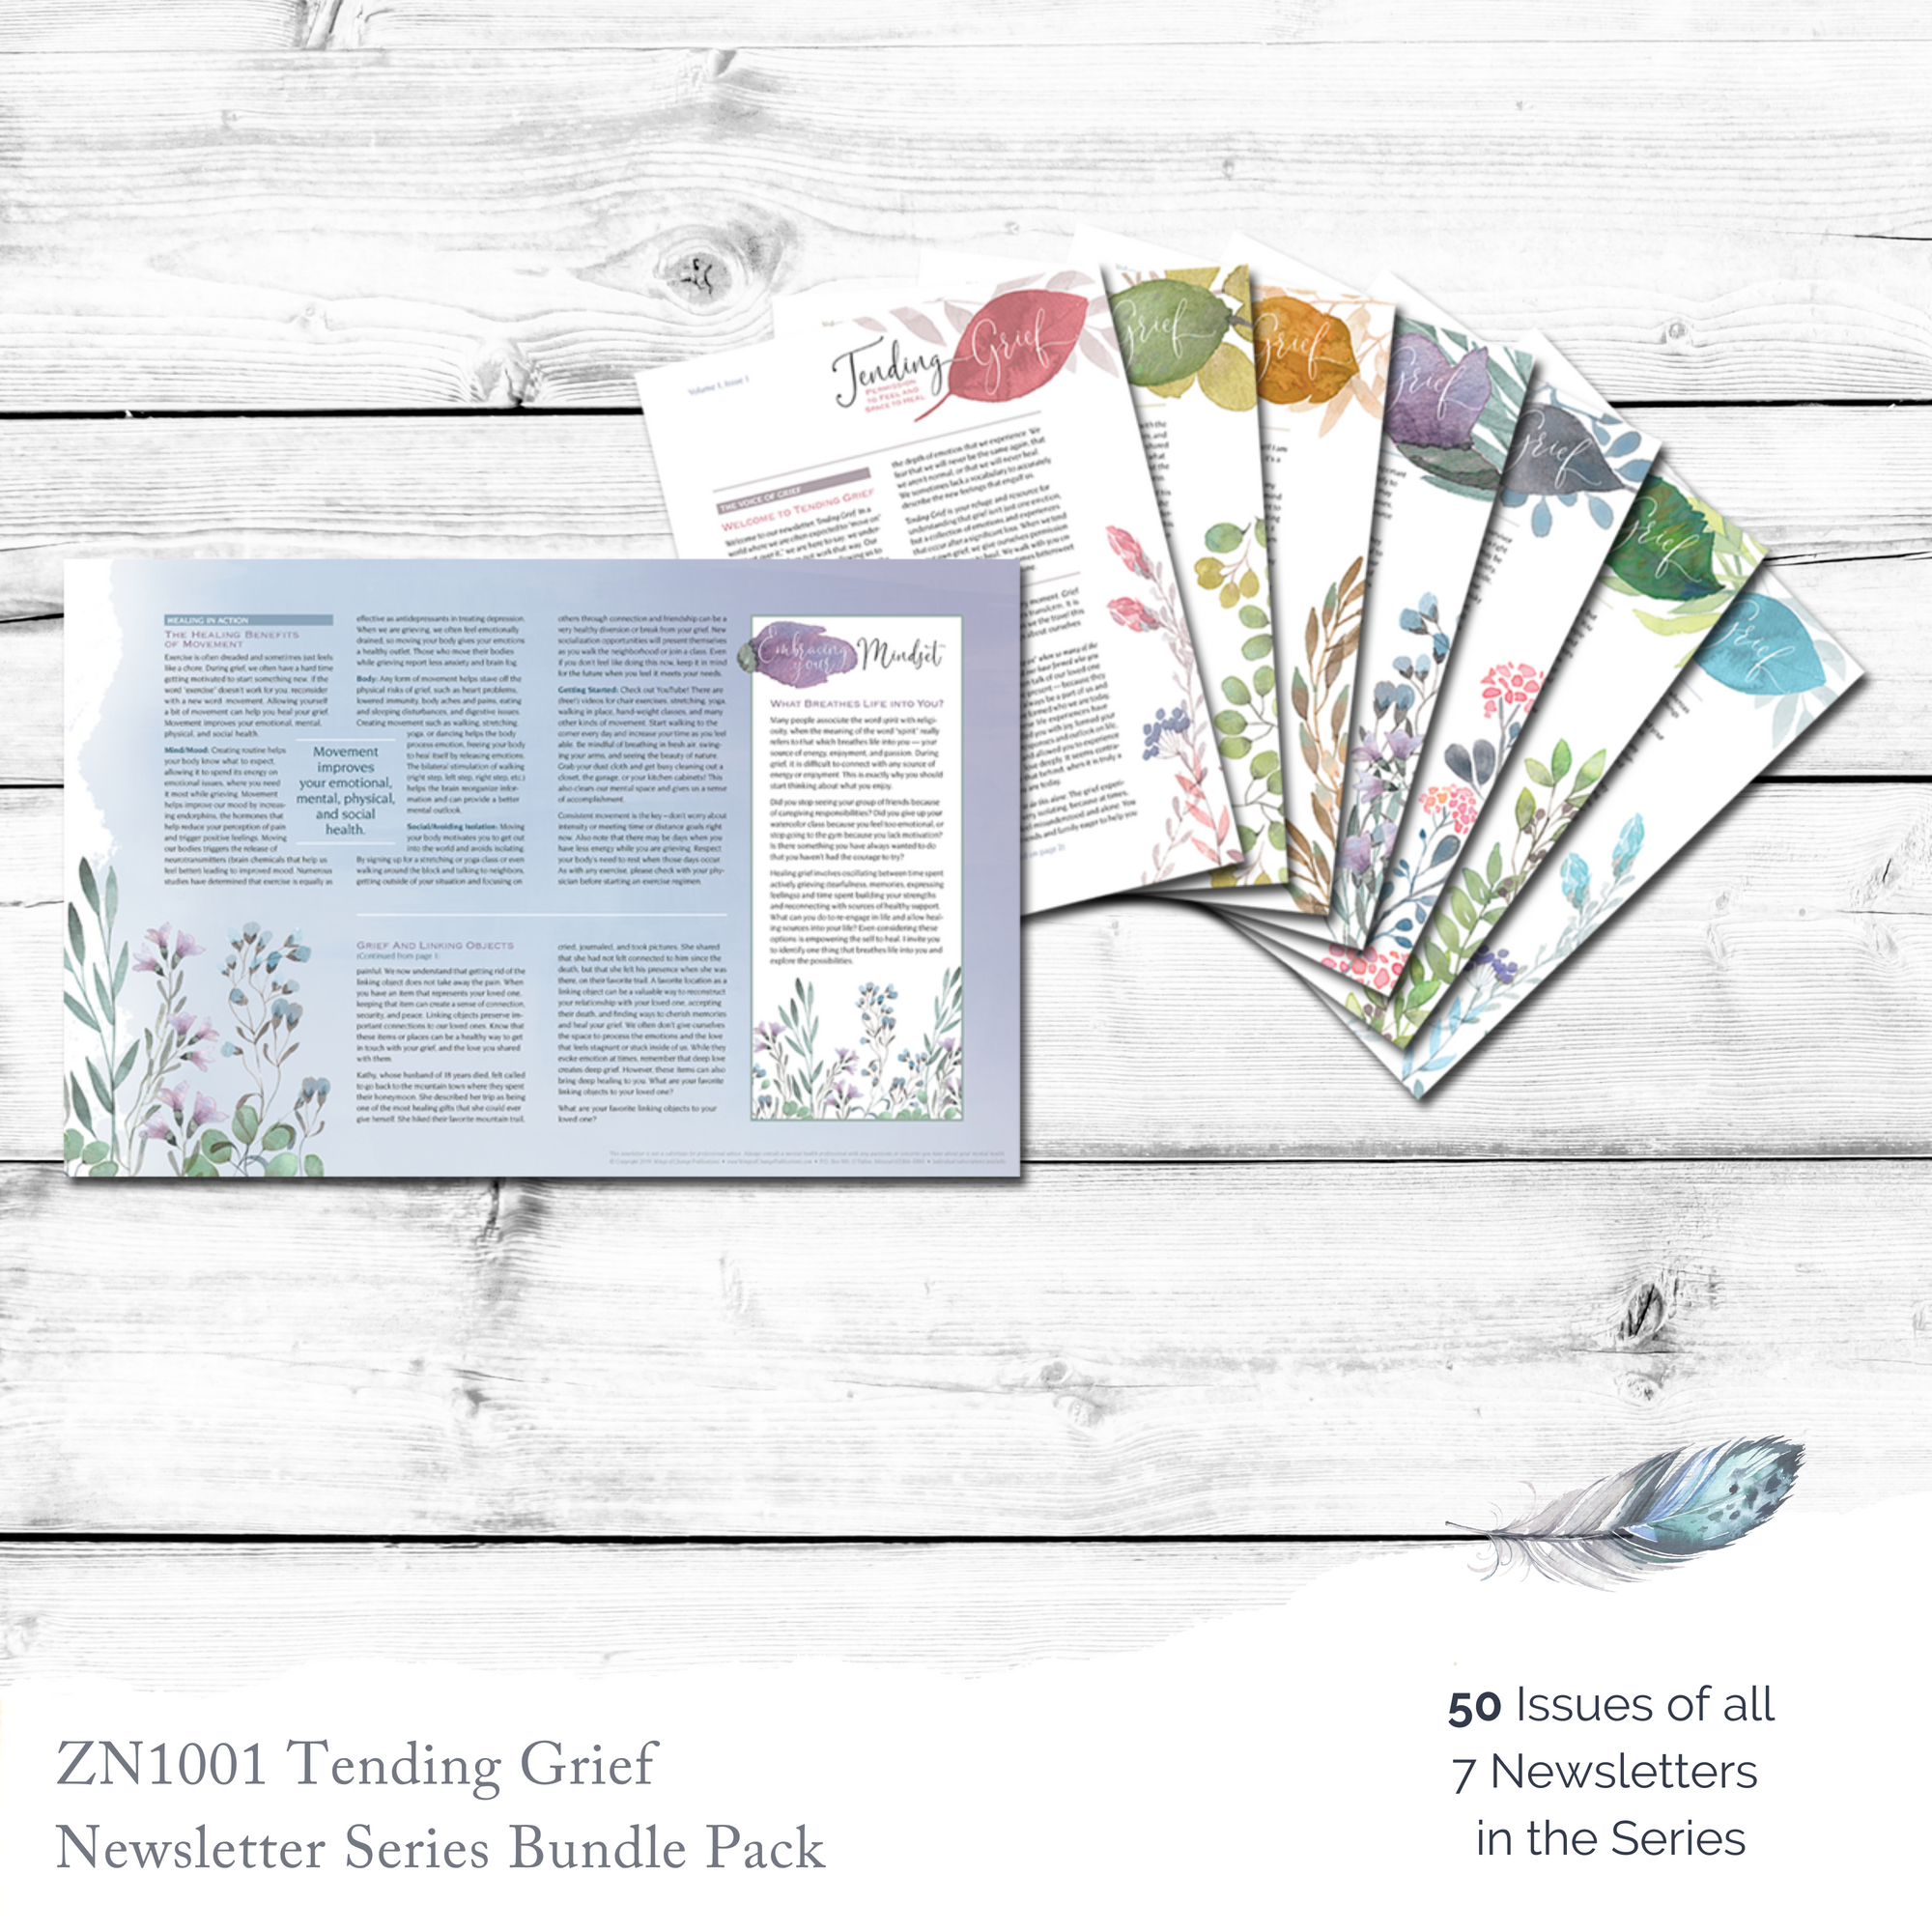 ZN1001 | Tending Grief Newsletter Series Bundle Pack (50 issues of all 7 issues in series)